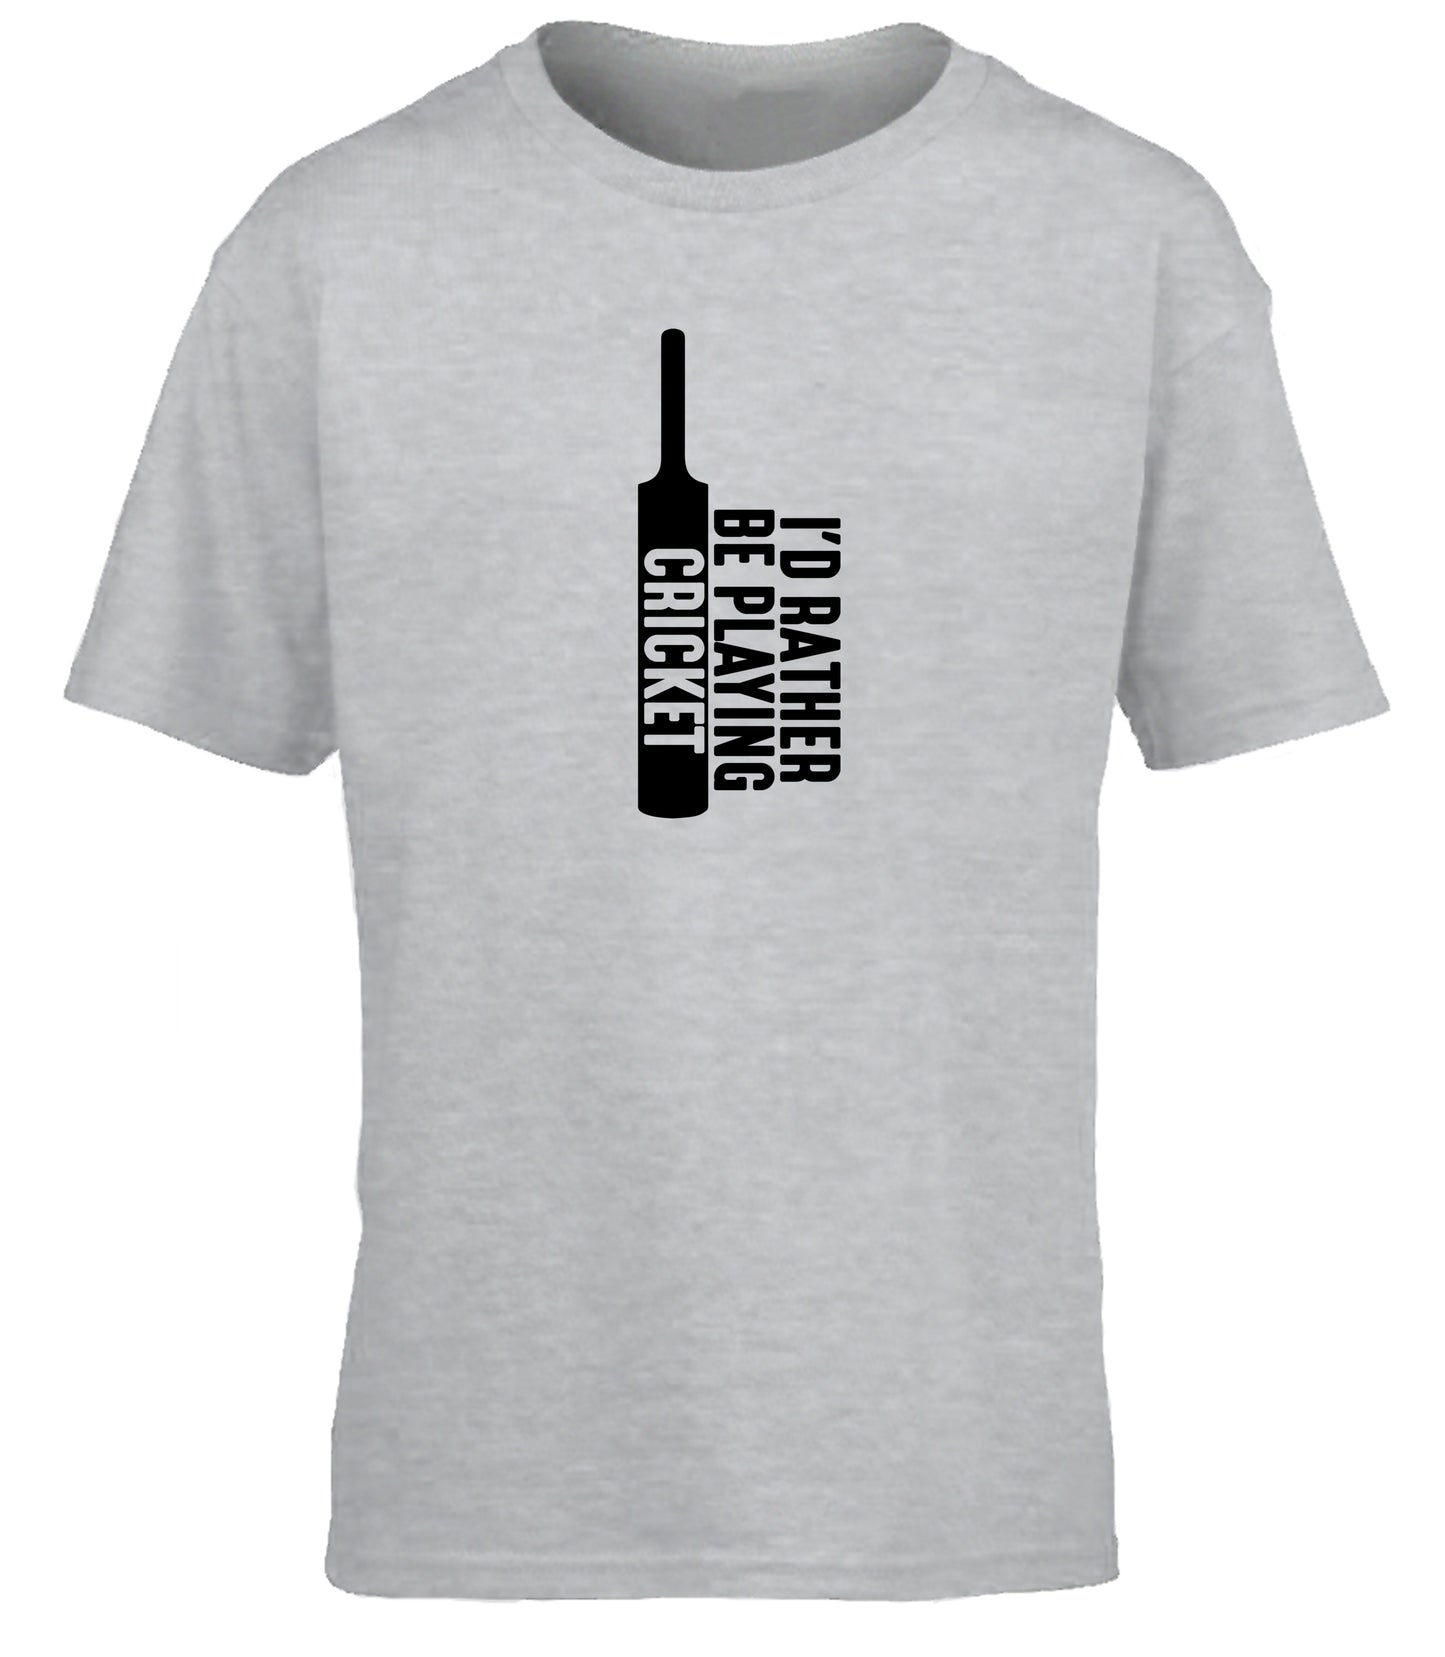 I'd Rather Be Playing Cricket (Printed Vertically) children's T-shirt